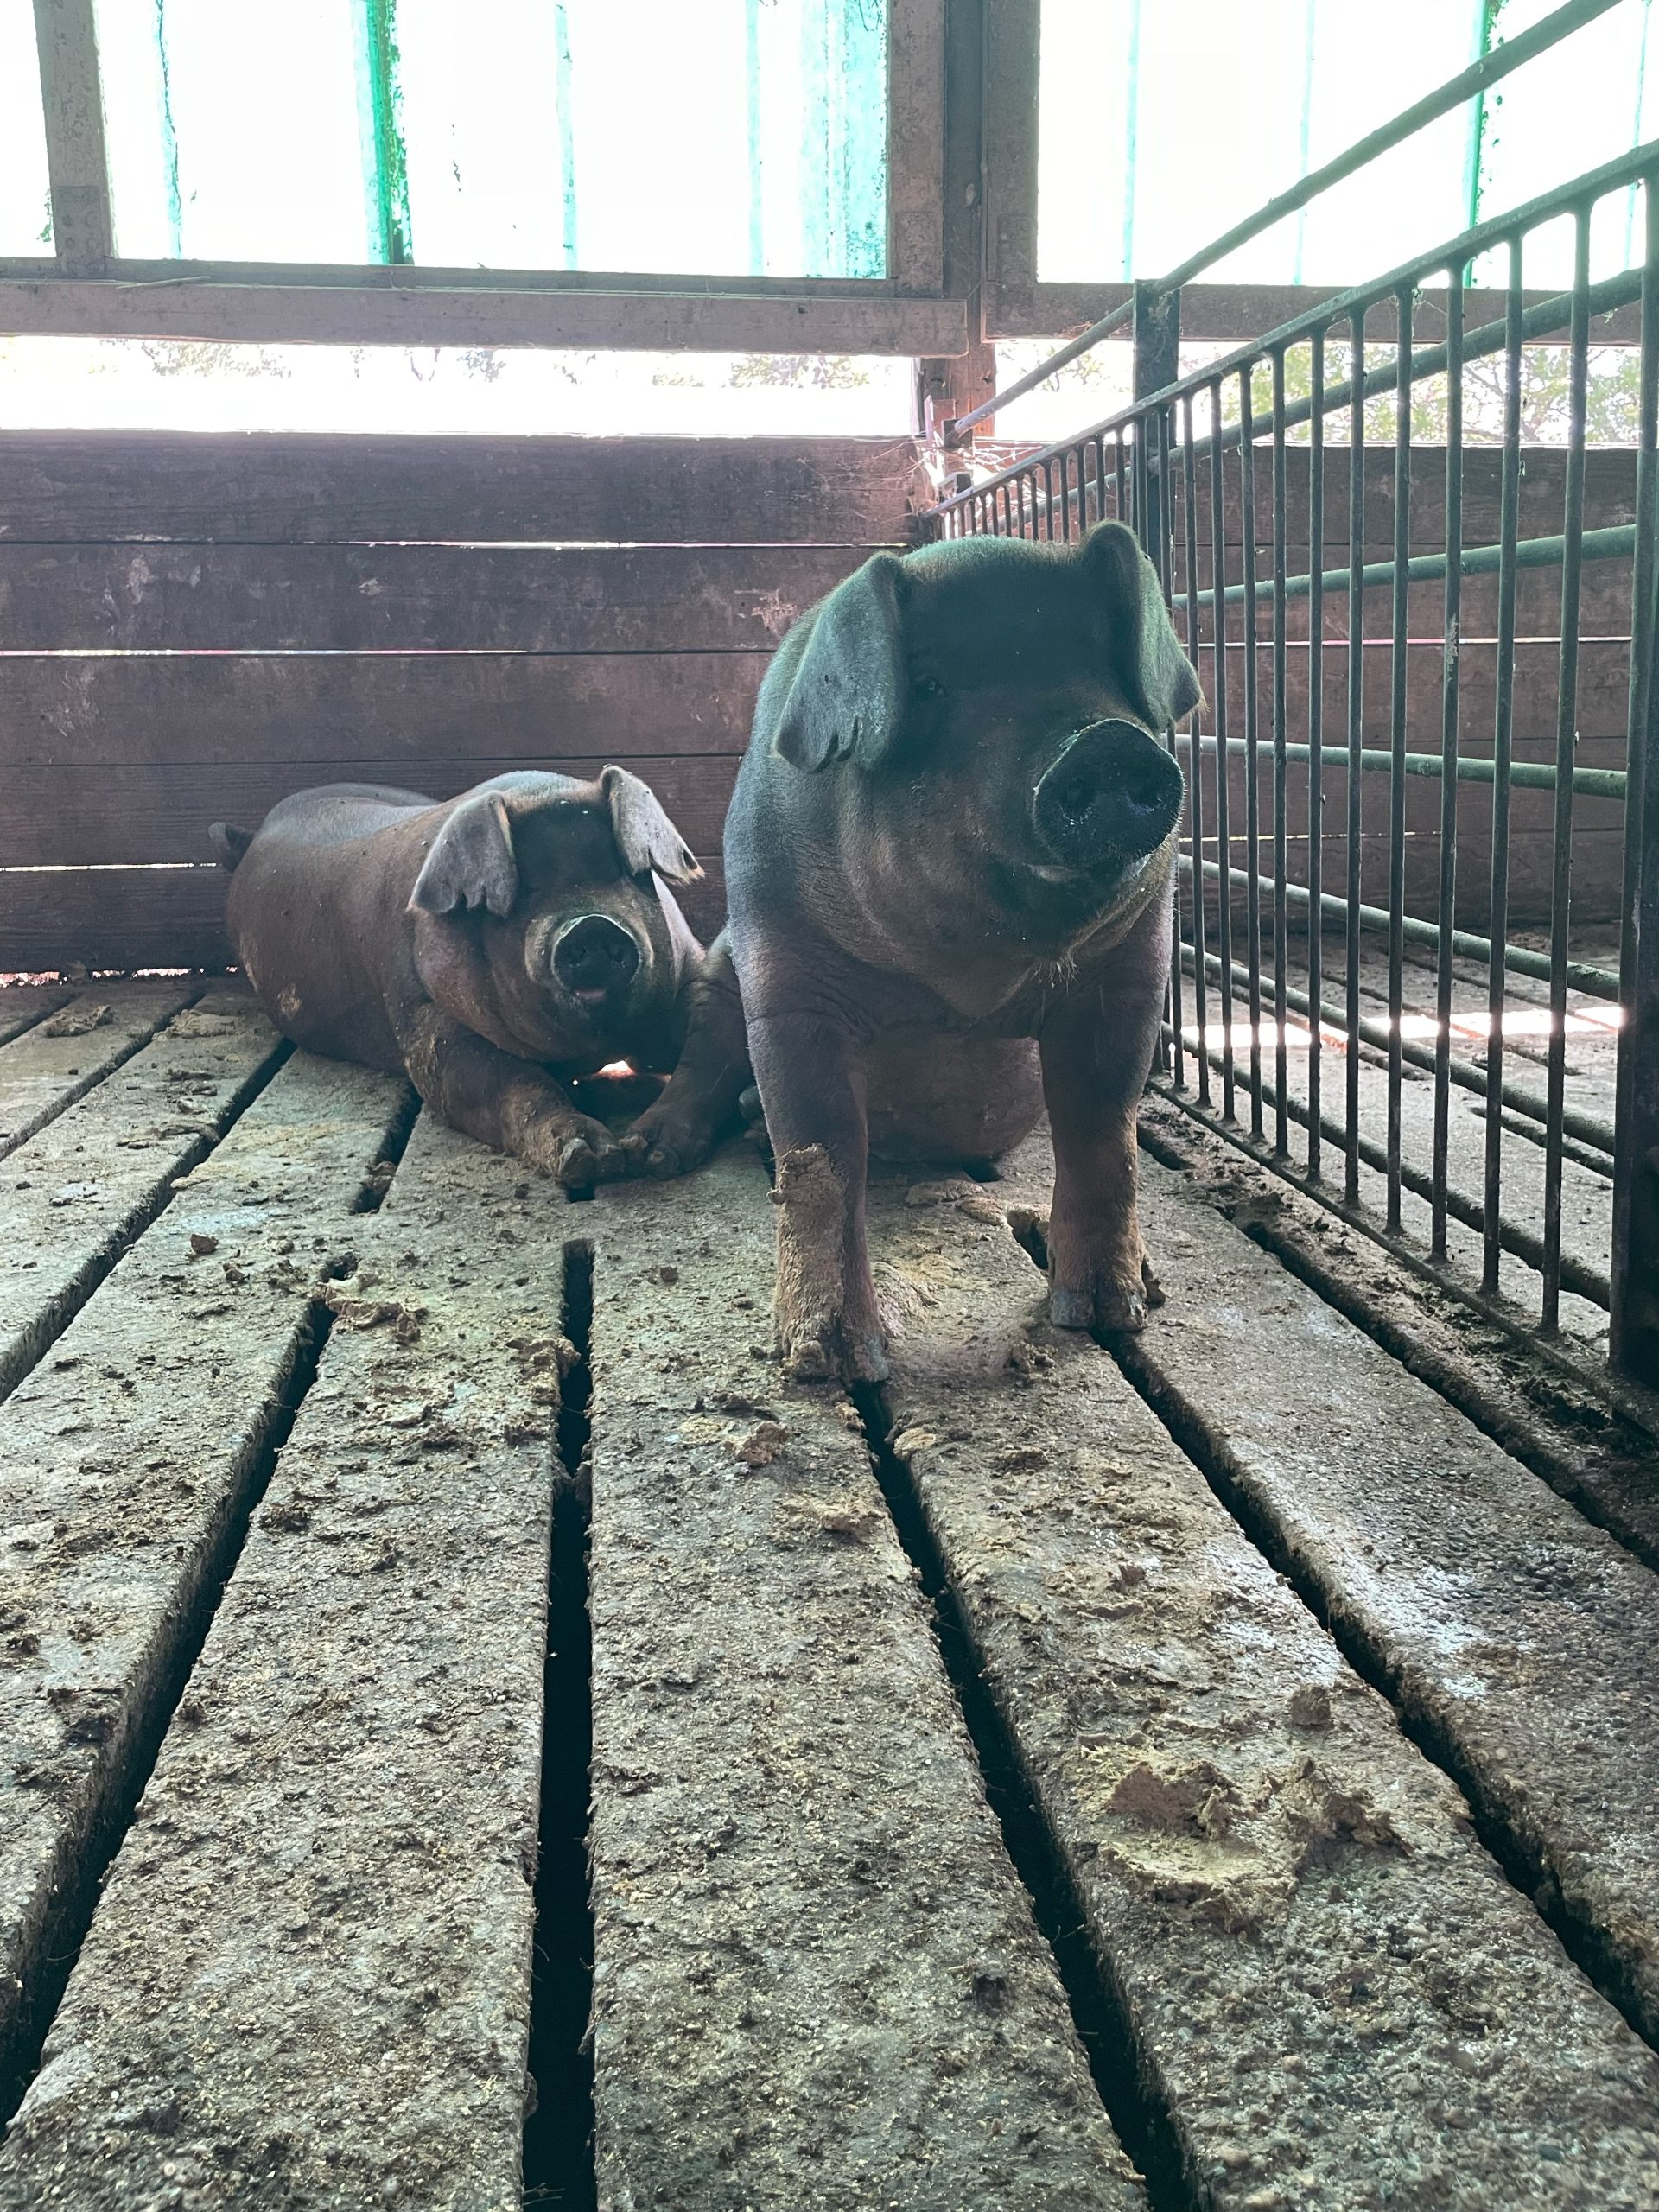 Two Duroc pigs on slats. (Photo by Natalie Sleichter.)